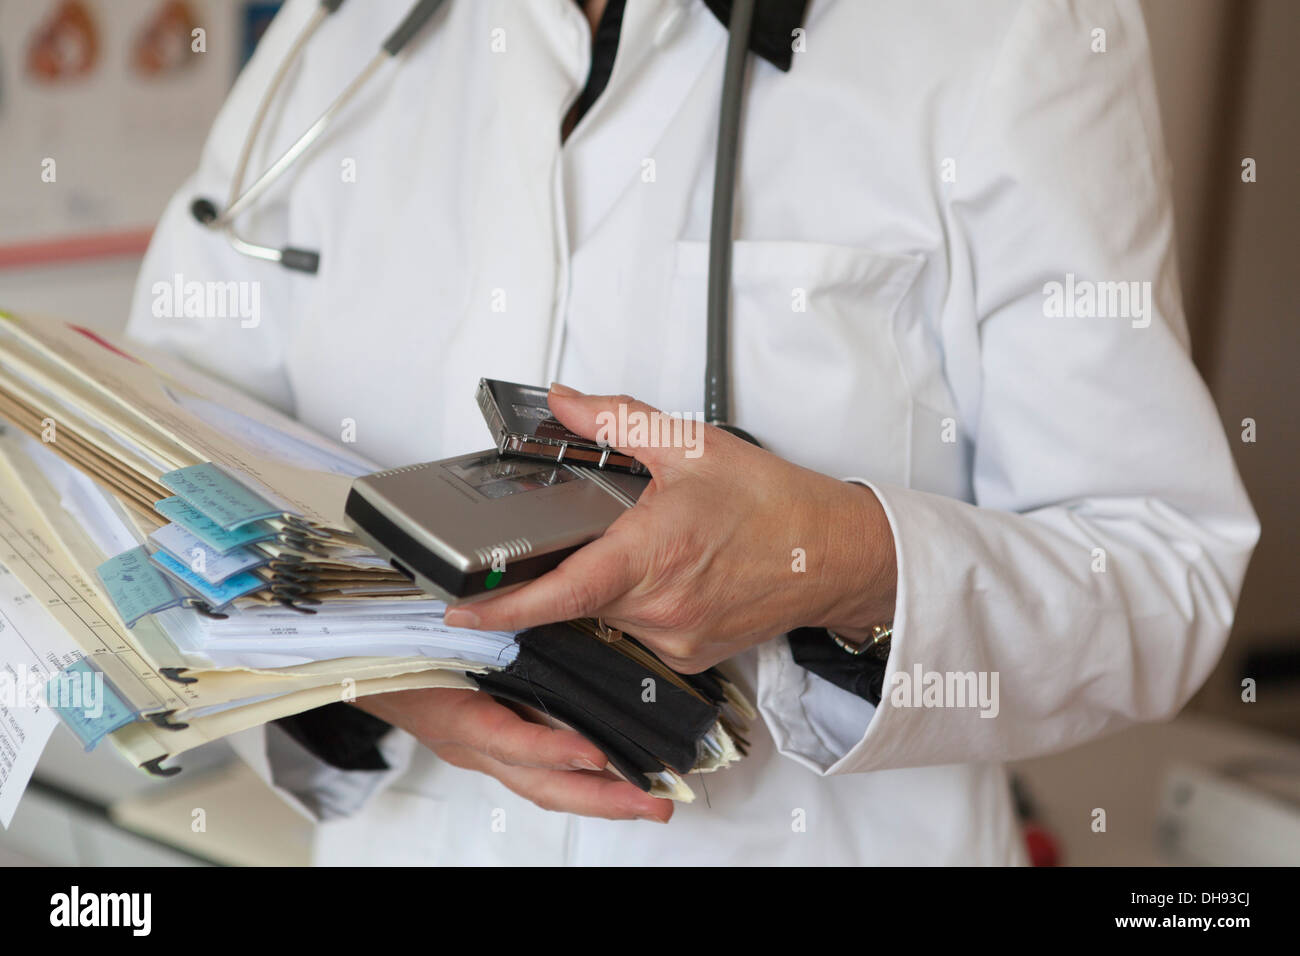 Close-up of overworked doctor holding patient files Stock Photo